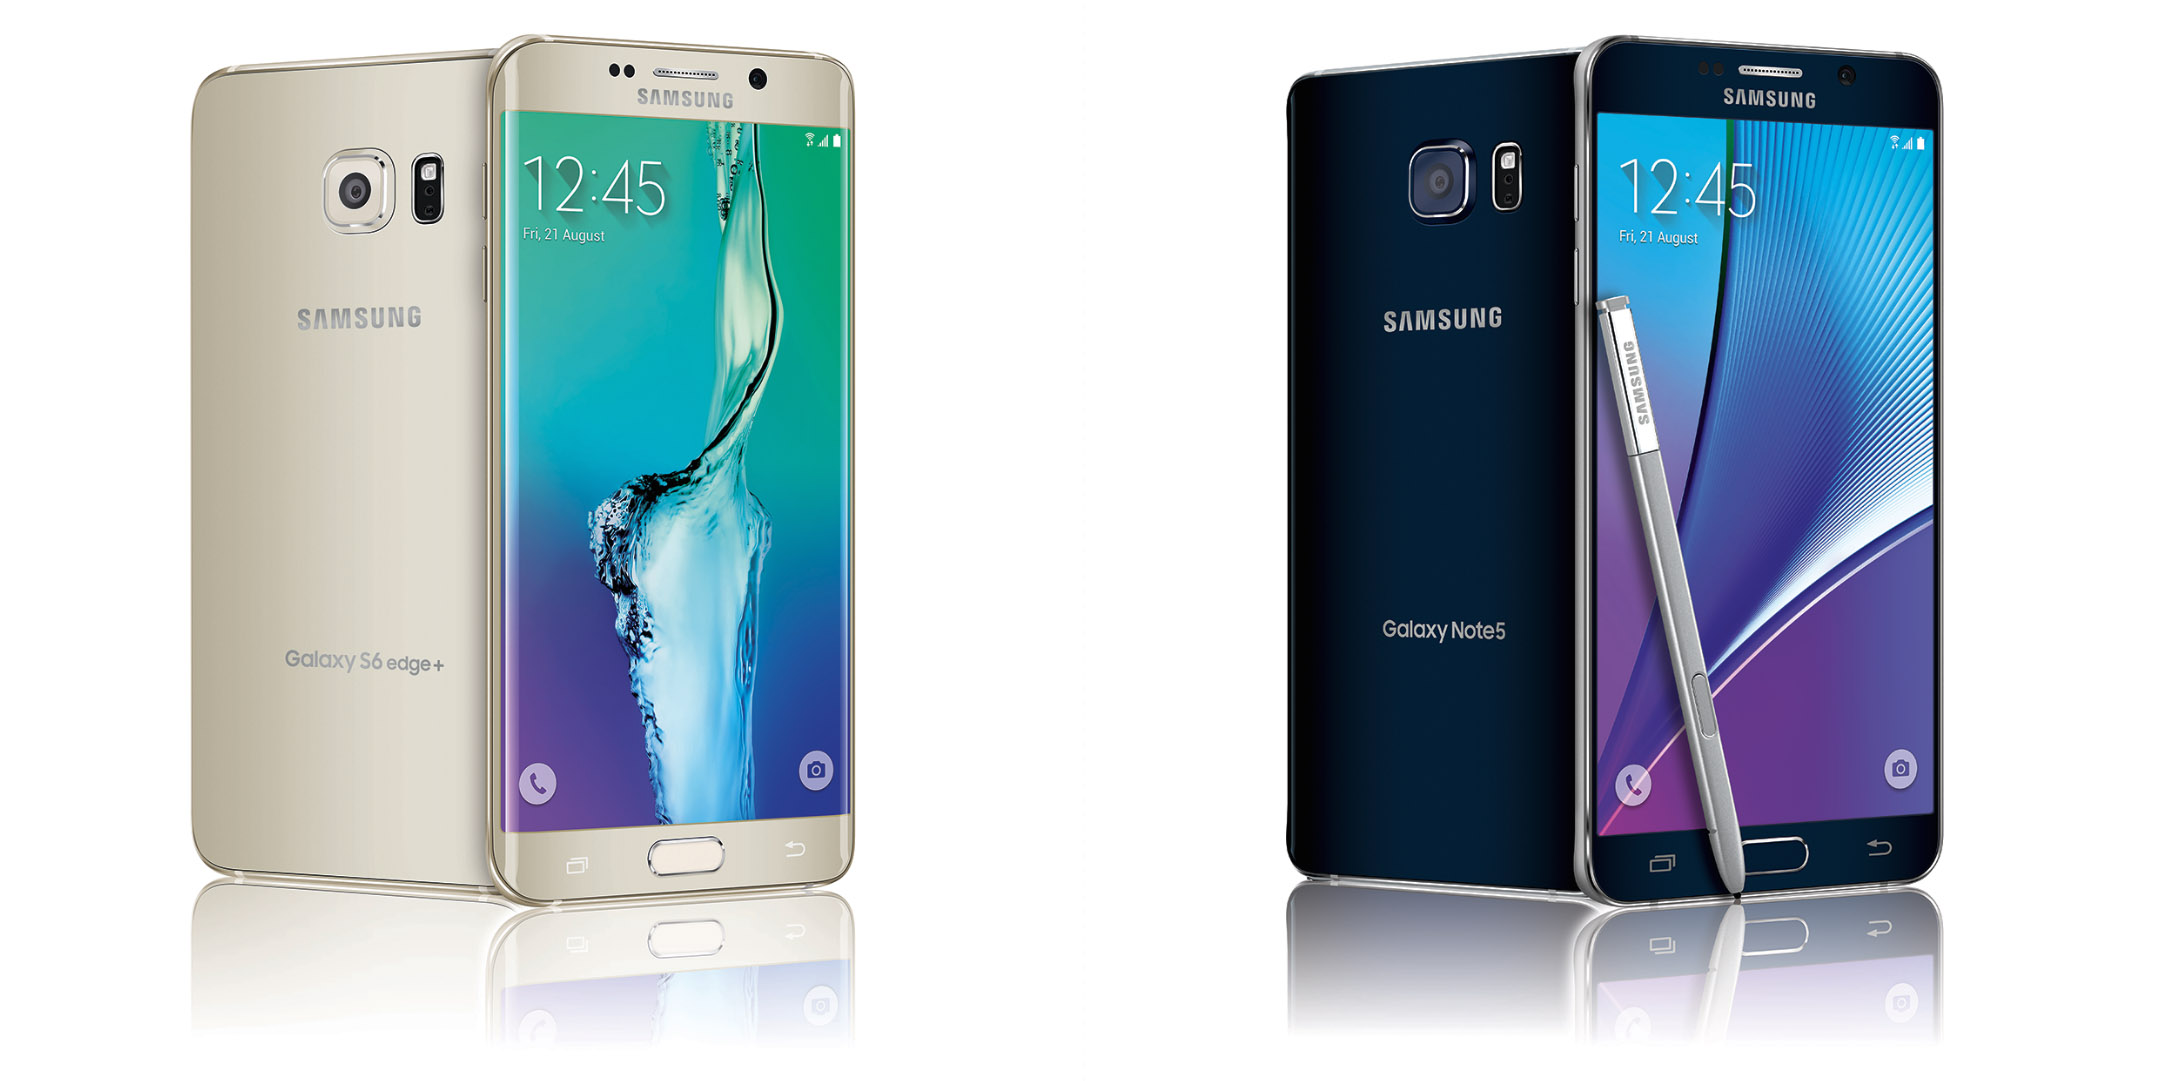 Samsung Unveils Galaxy Note 5, Galaxy S6 Edge+: Fast Wireless Charging And S Pen Stylus